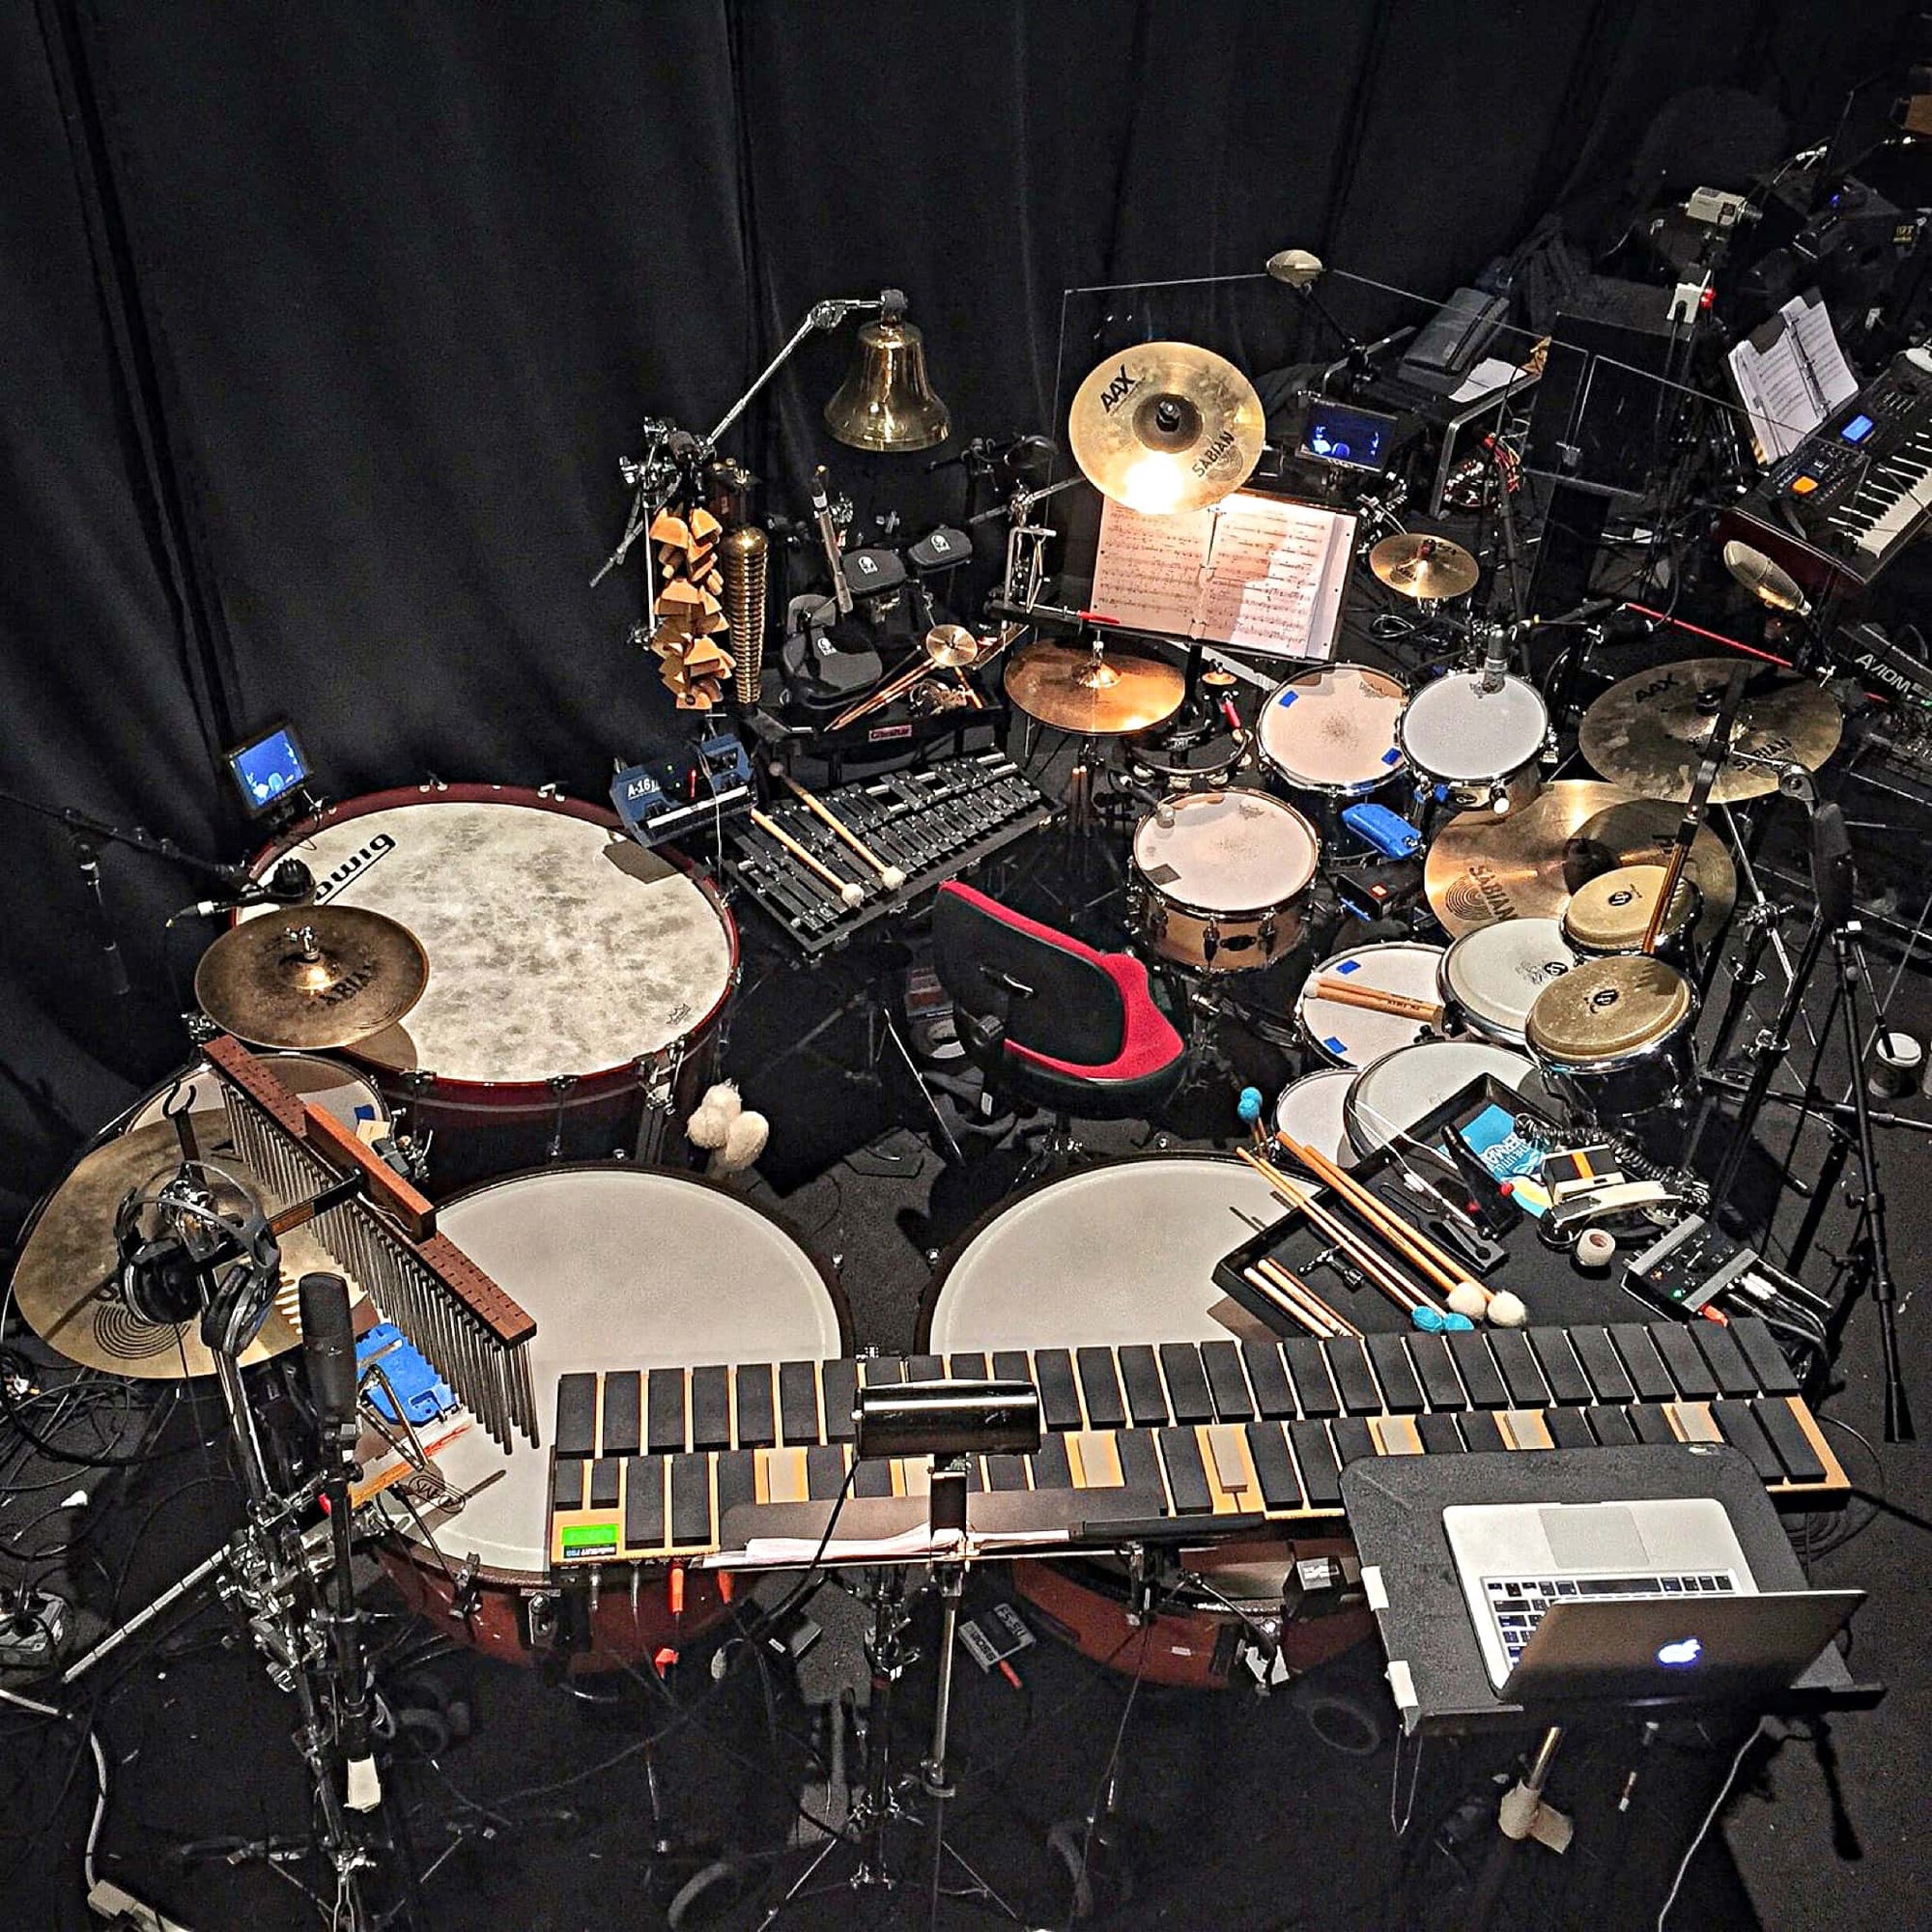 Ethan Deppe’s setup for The Little Mermaid at the Chicago Shakespeare Theatre in Chicago, Illinois.